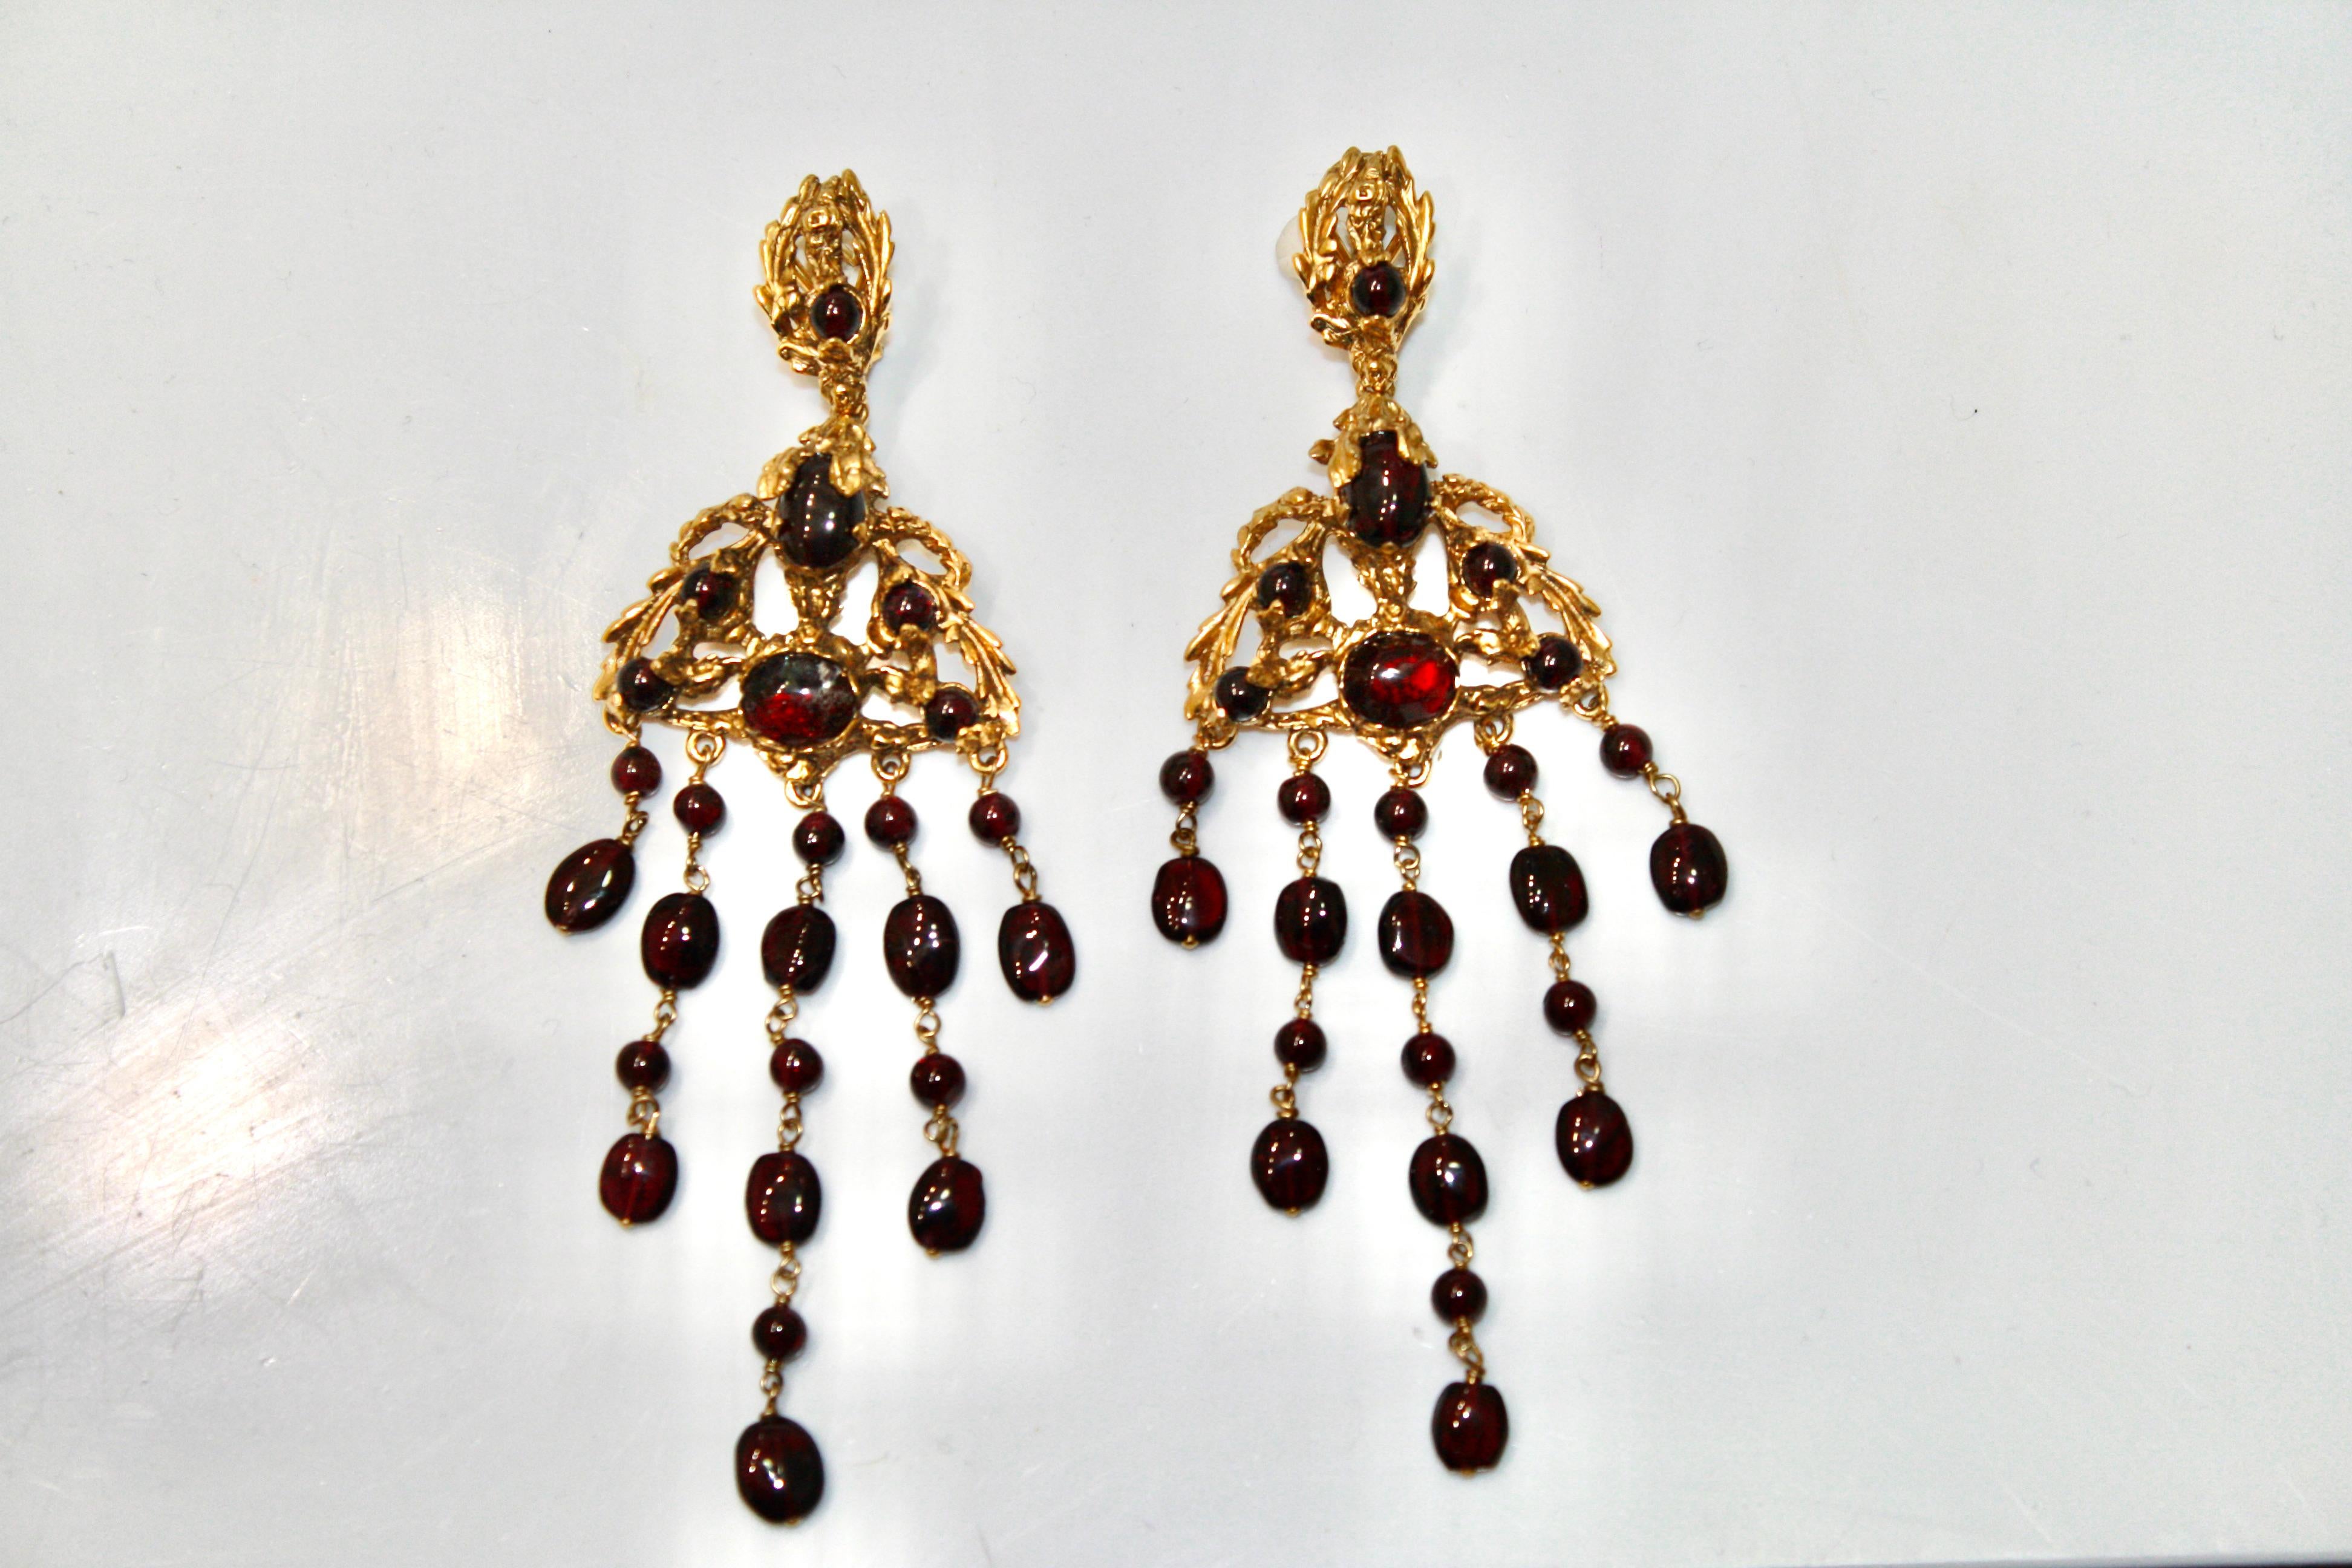 From the Empire Goossens Paris collection,  24 carat gilded bronze and garnet french back pierced earrings.